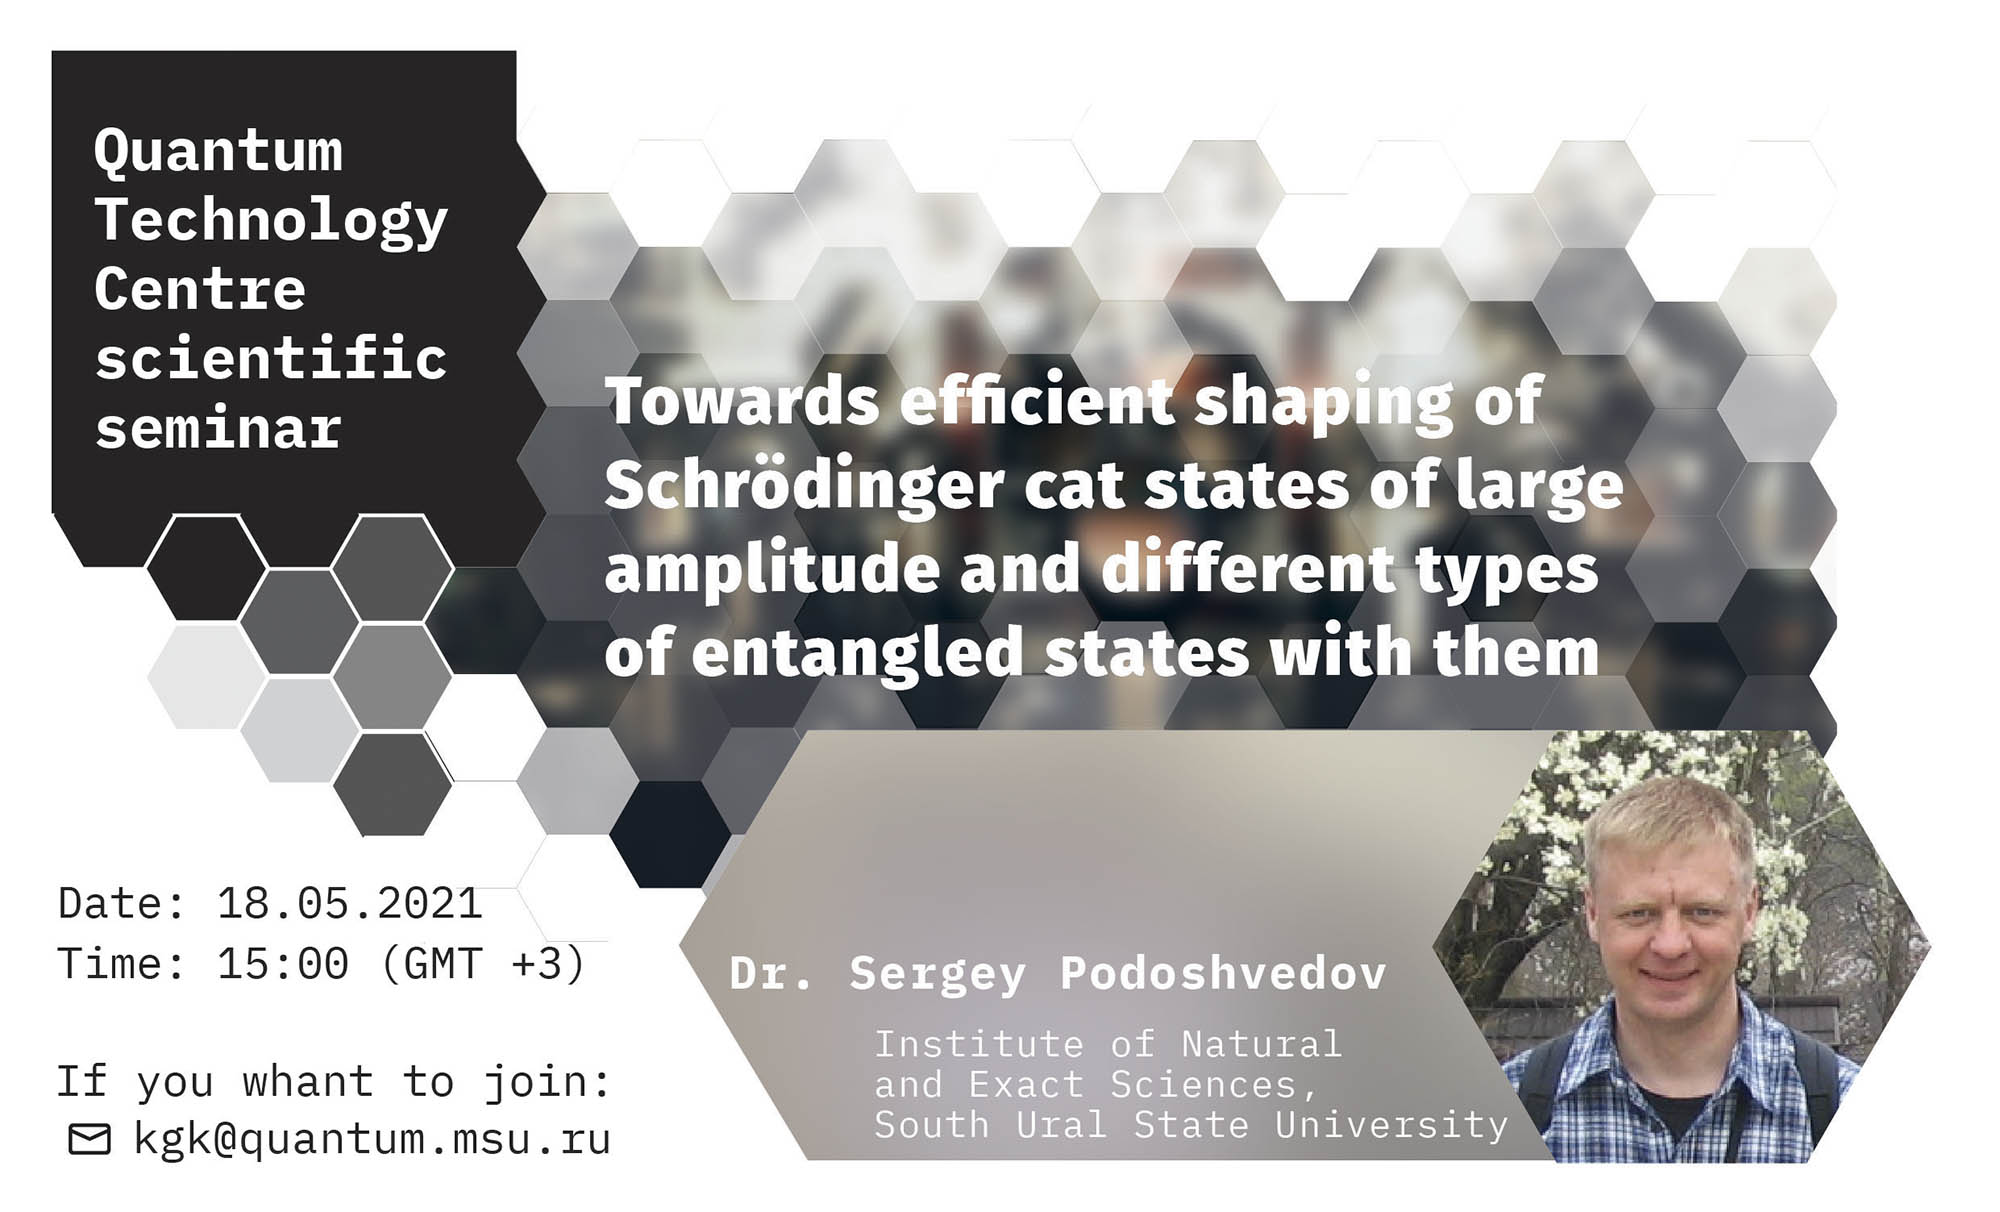 Сергей Подошведов  — Towards efficient shaping of Schrödinger cat states of large amplitude and different types of entangled states with them